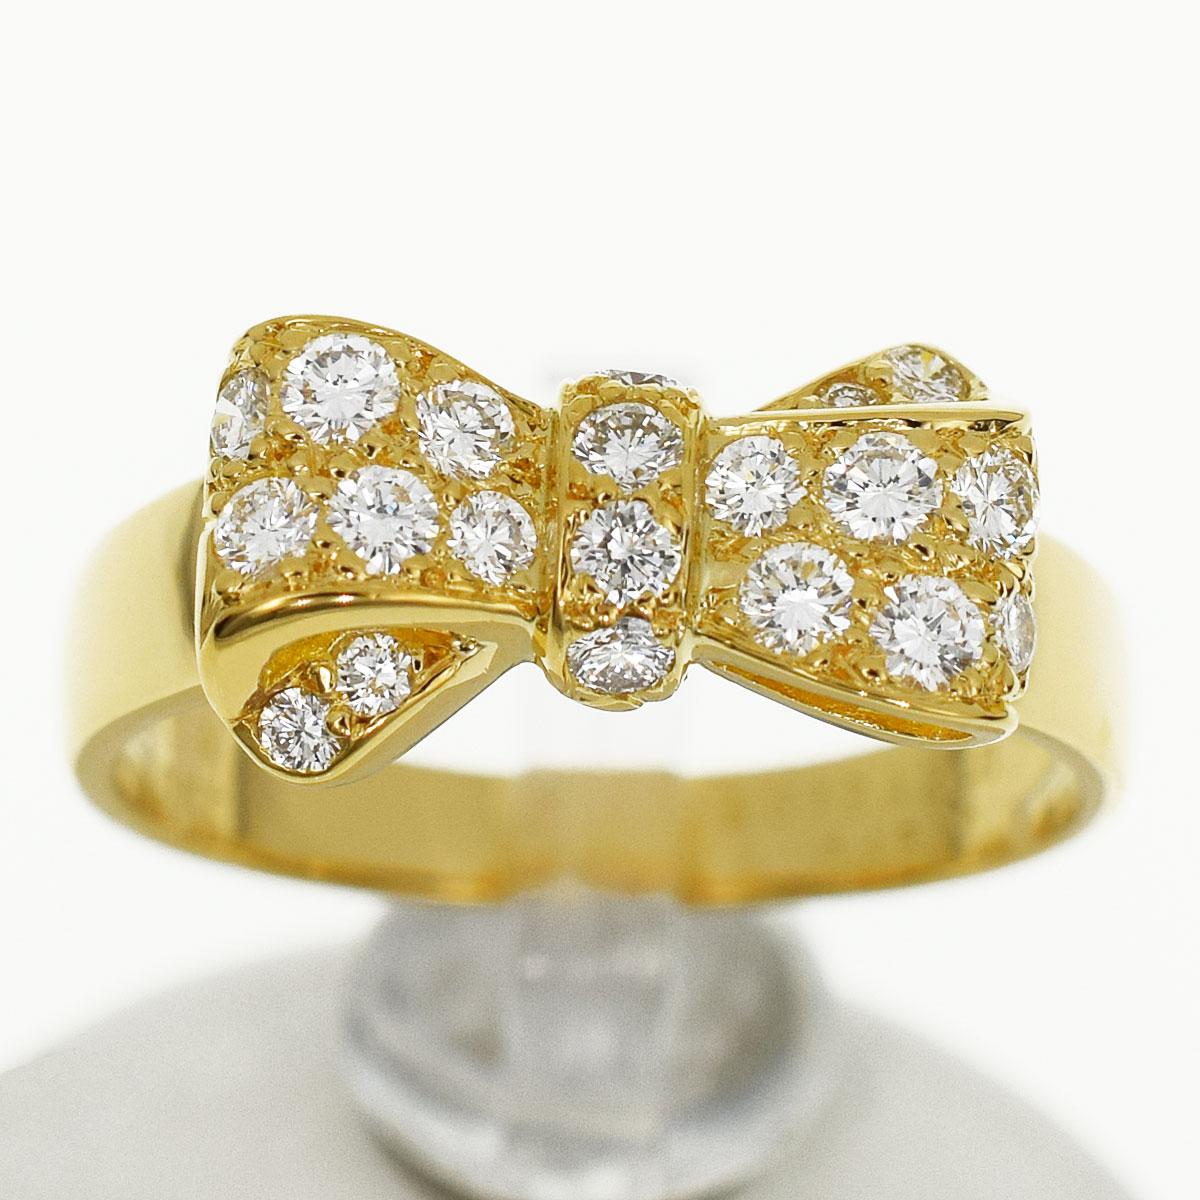 Brand: Van Cleef&Arpels
Name:Alice Bow Ribbon Diamond Ring
Material:Diamonds(D0.46ct), 750 K18 YG Yellow Gold
Comes with:Van Cleef & Arpels Box,Case, Repair Certificate (June 2019)
Ring size:British & Australian:N  /   US & Canada:6.5   /  French &